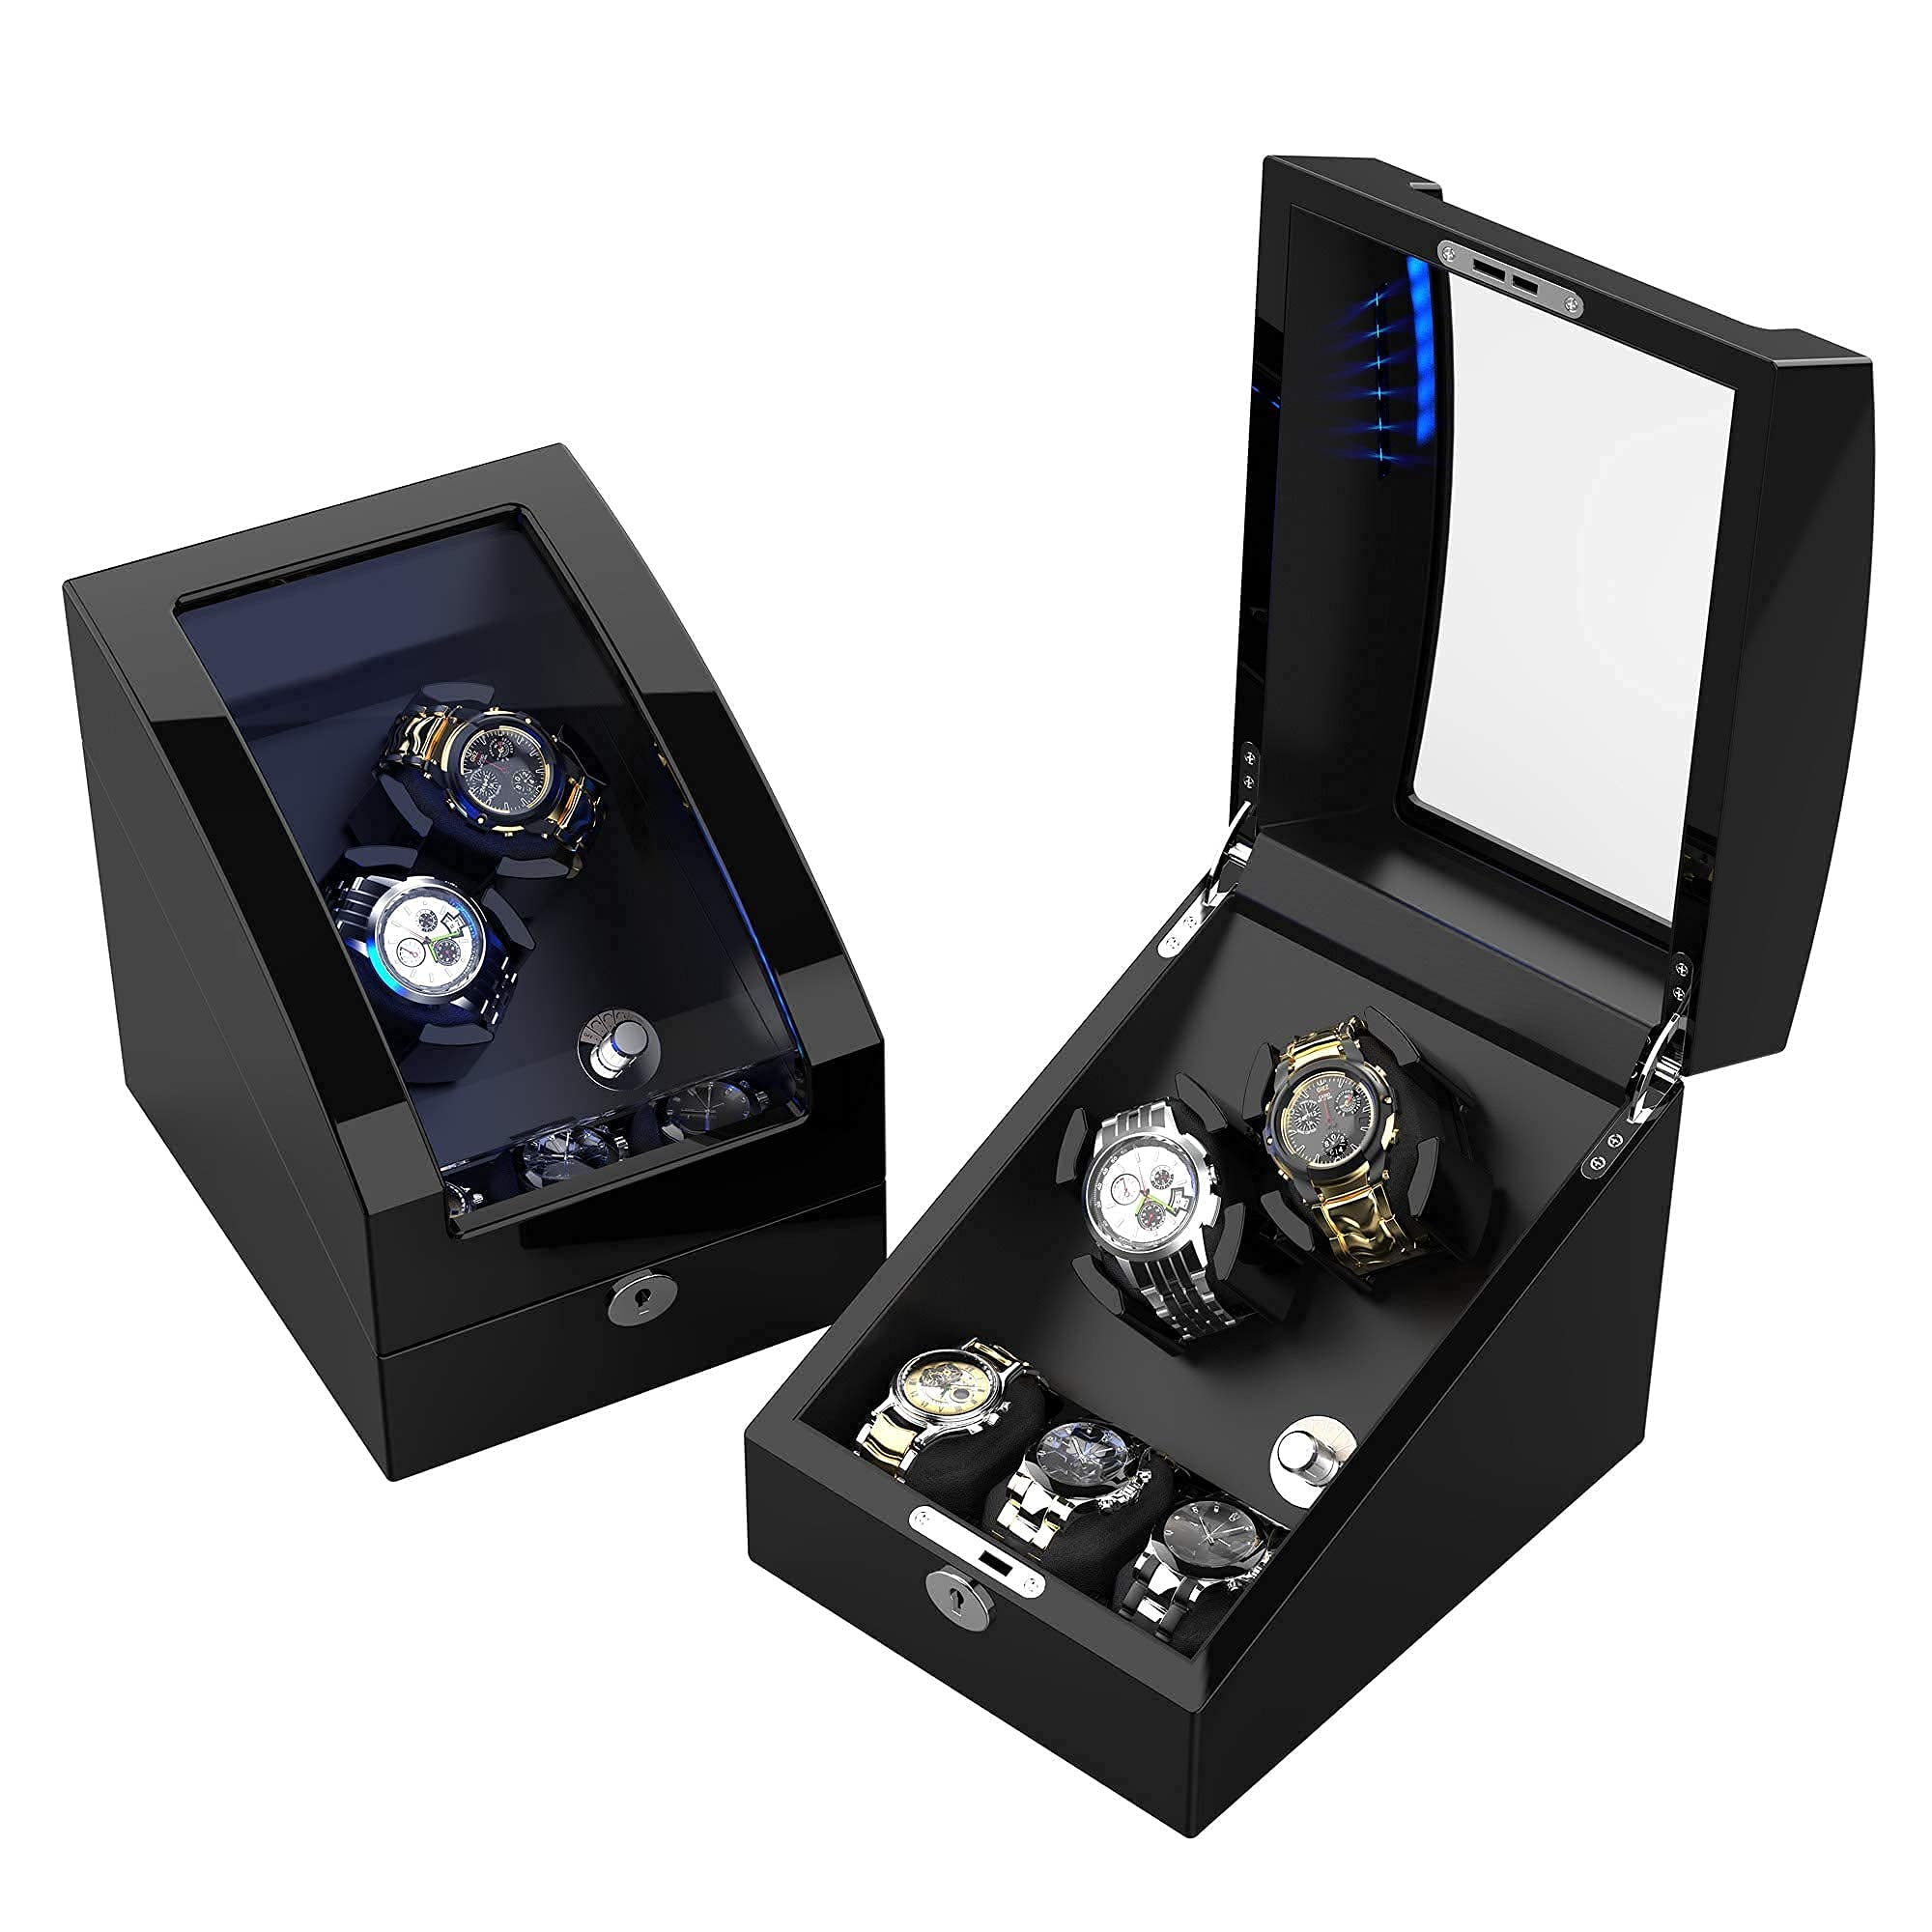 TRIPLE TREE Double Watch Winder+ 3 Soft Leather Watch Pillows LED Automatic Watches Winding Box Wood Shell Mechanical Watch Shaker Japanese Quiet Motor Watch Spinner Case Fit Lady and Man Watches